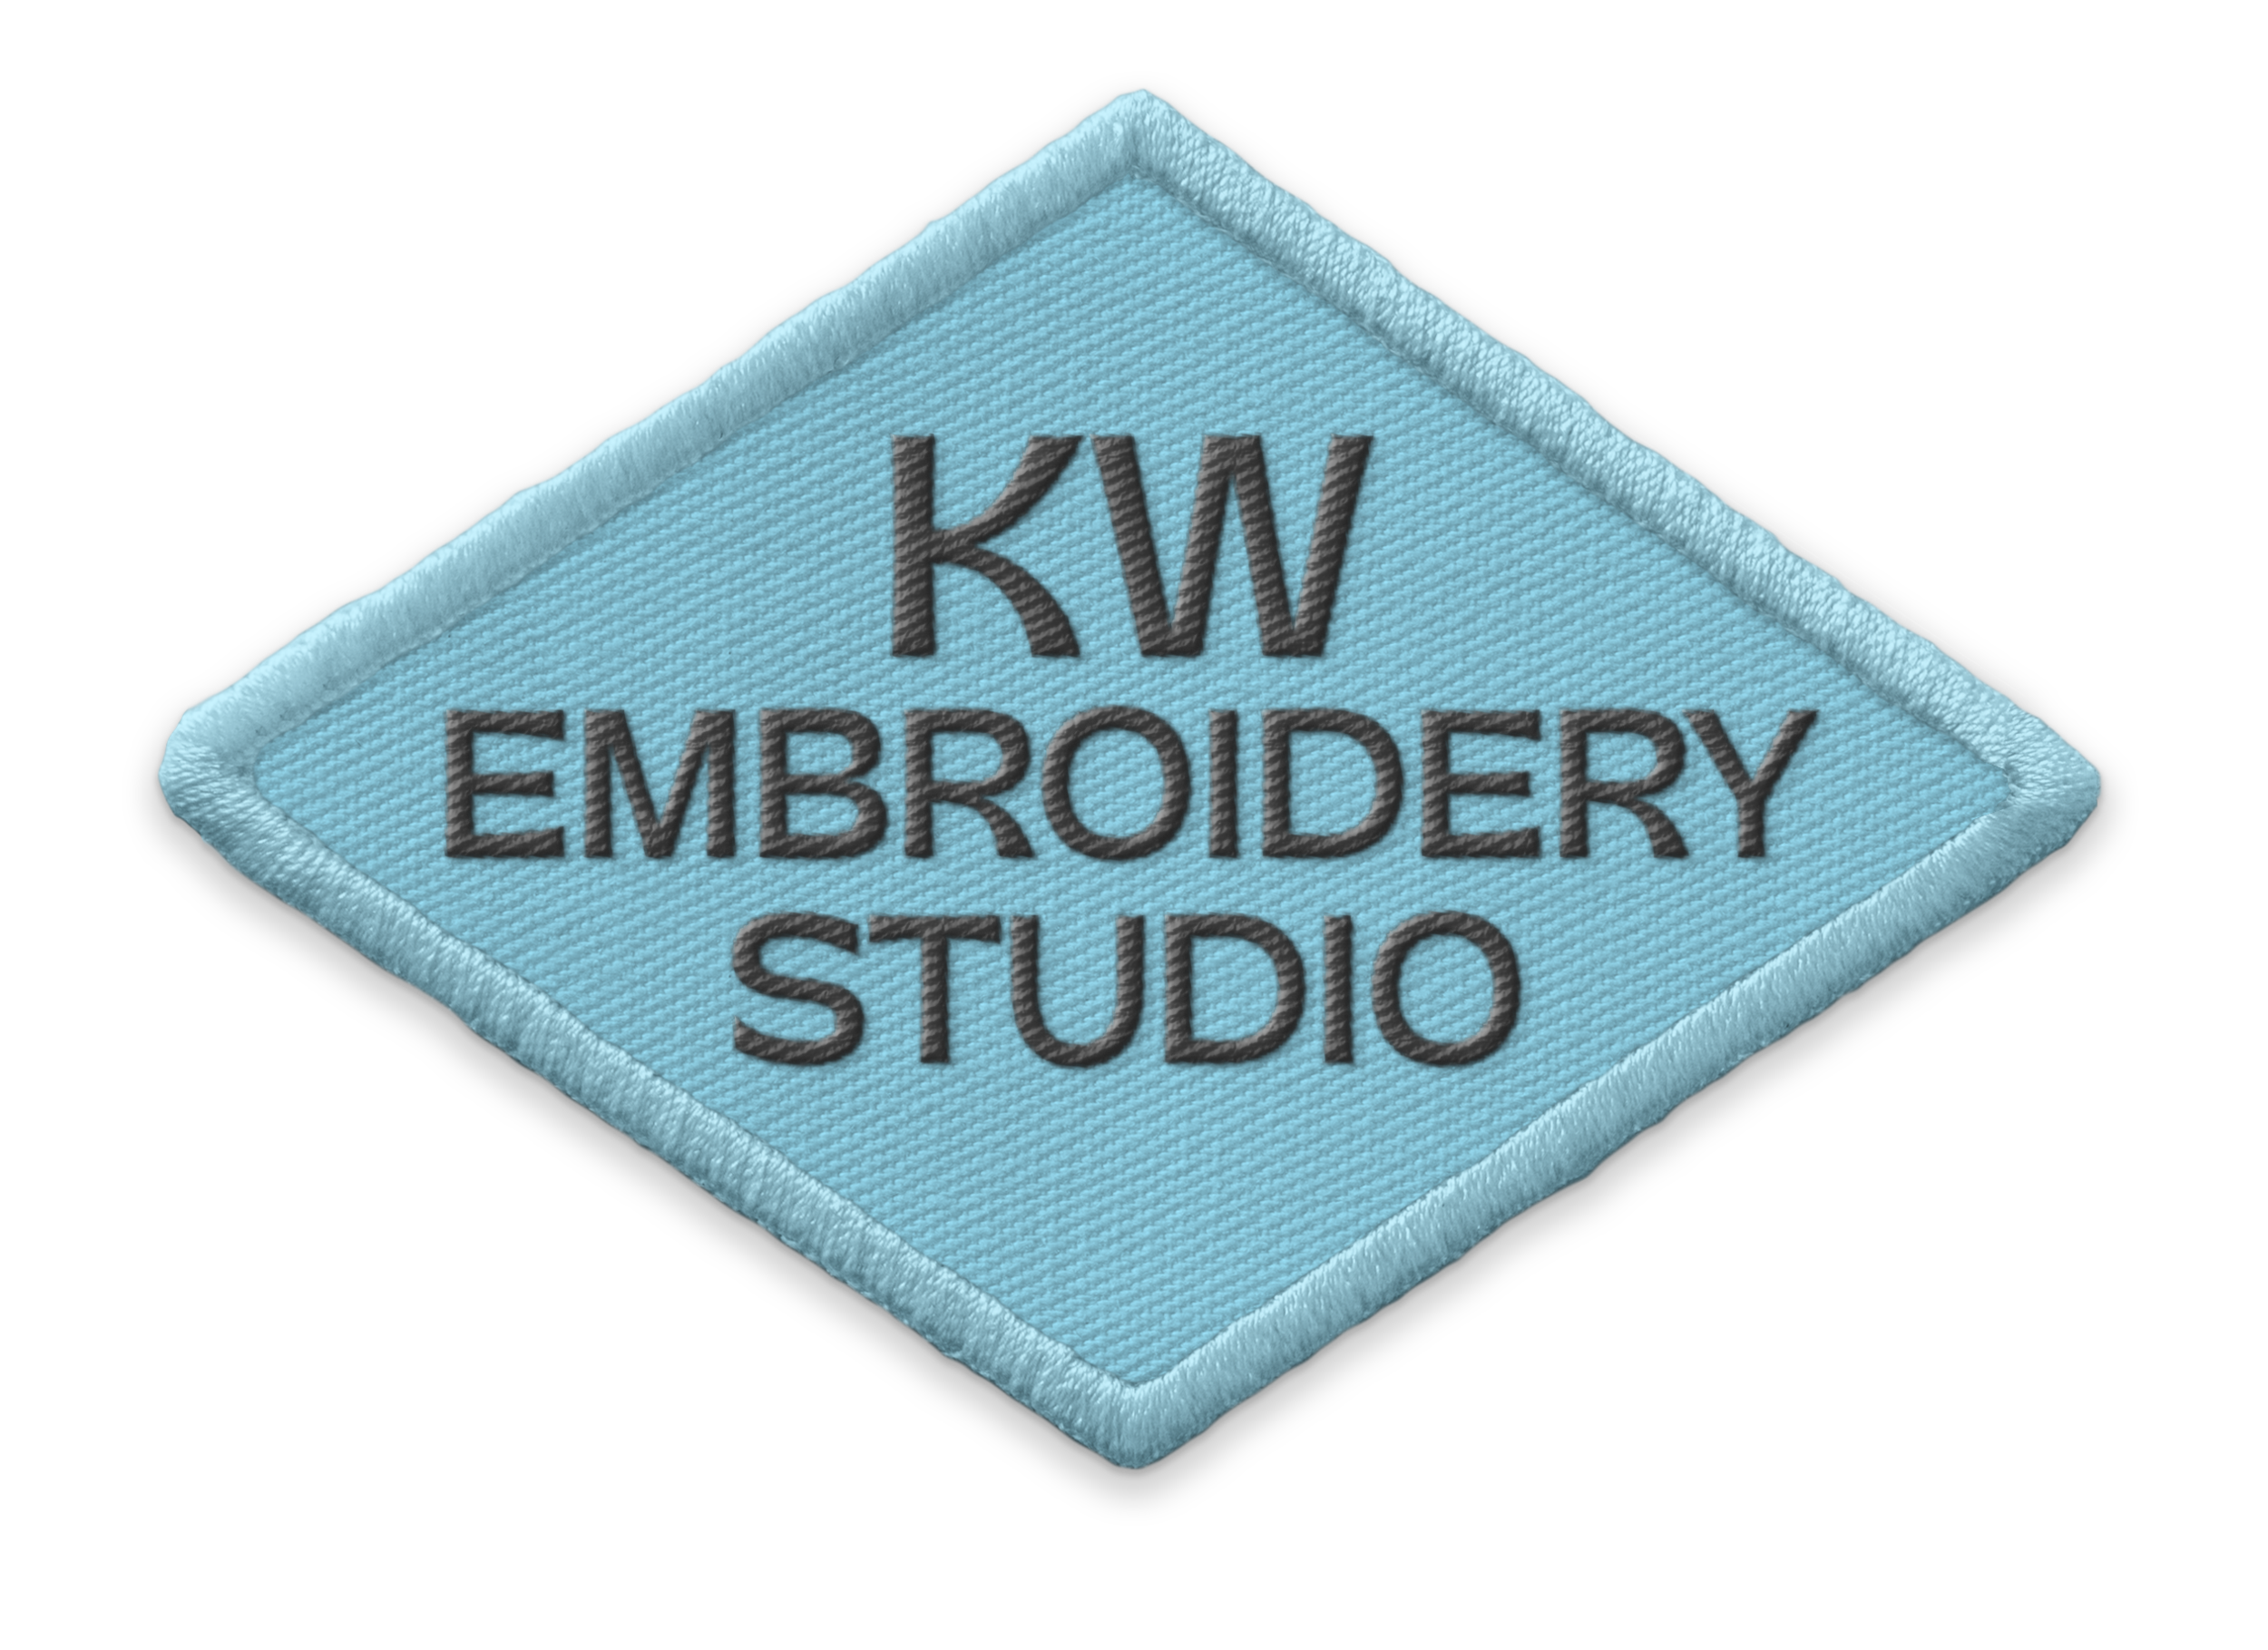 KW Embroidery